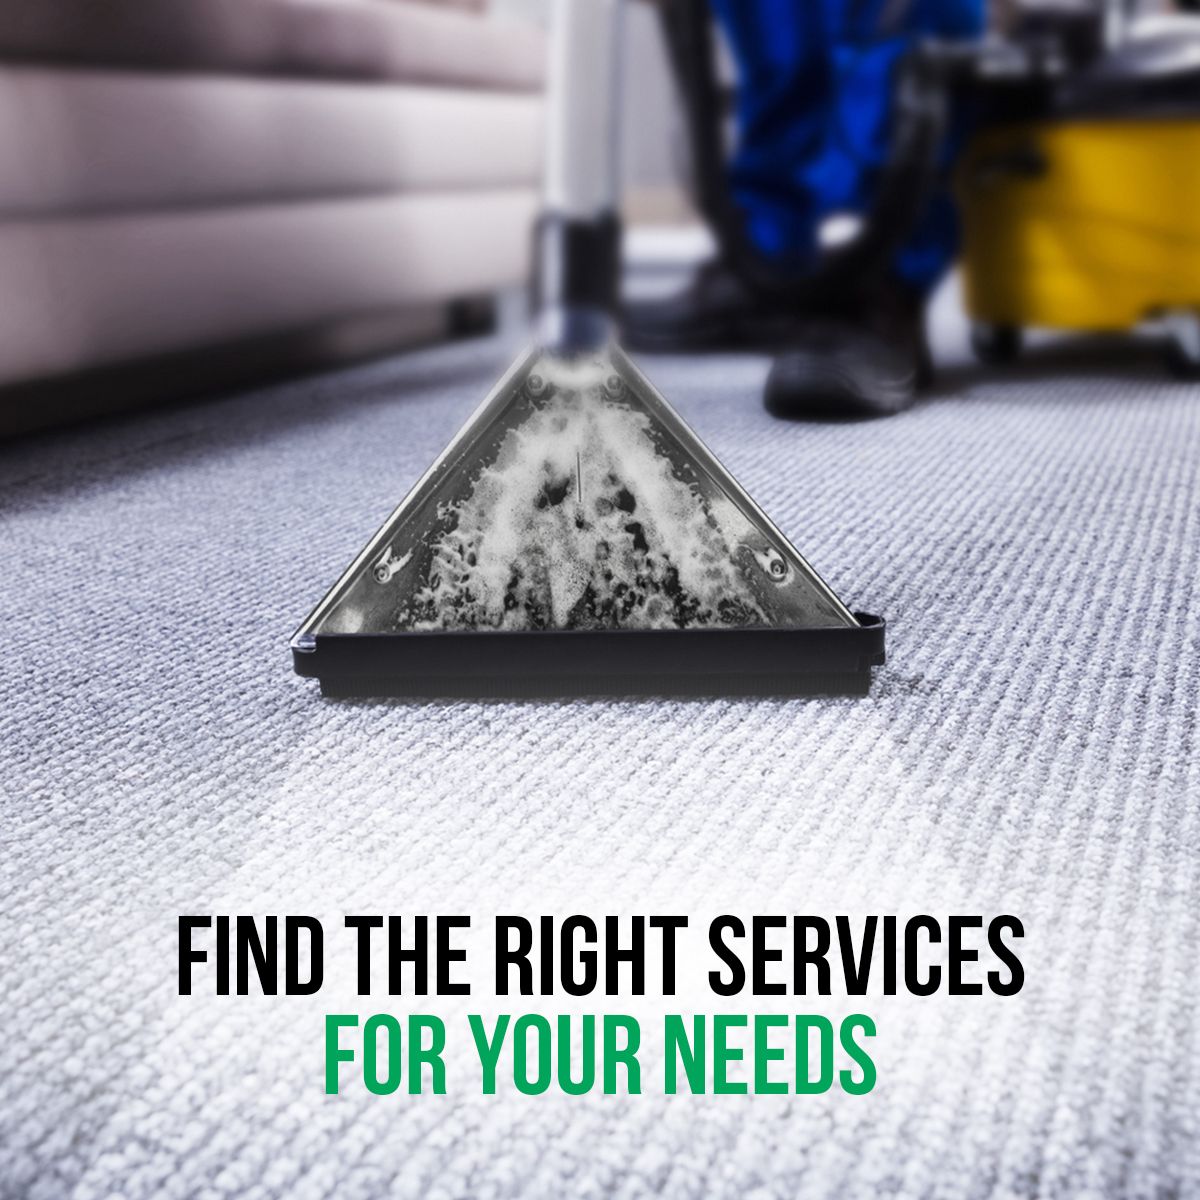 Find the right services for your needs.